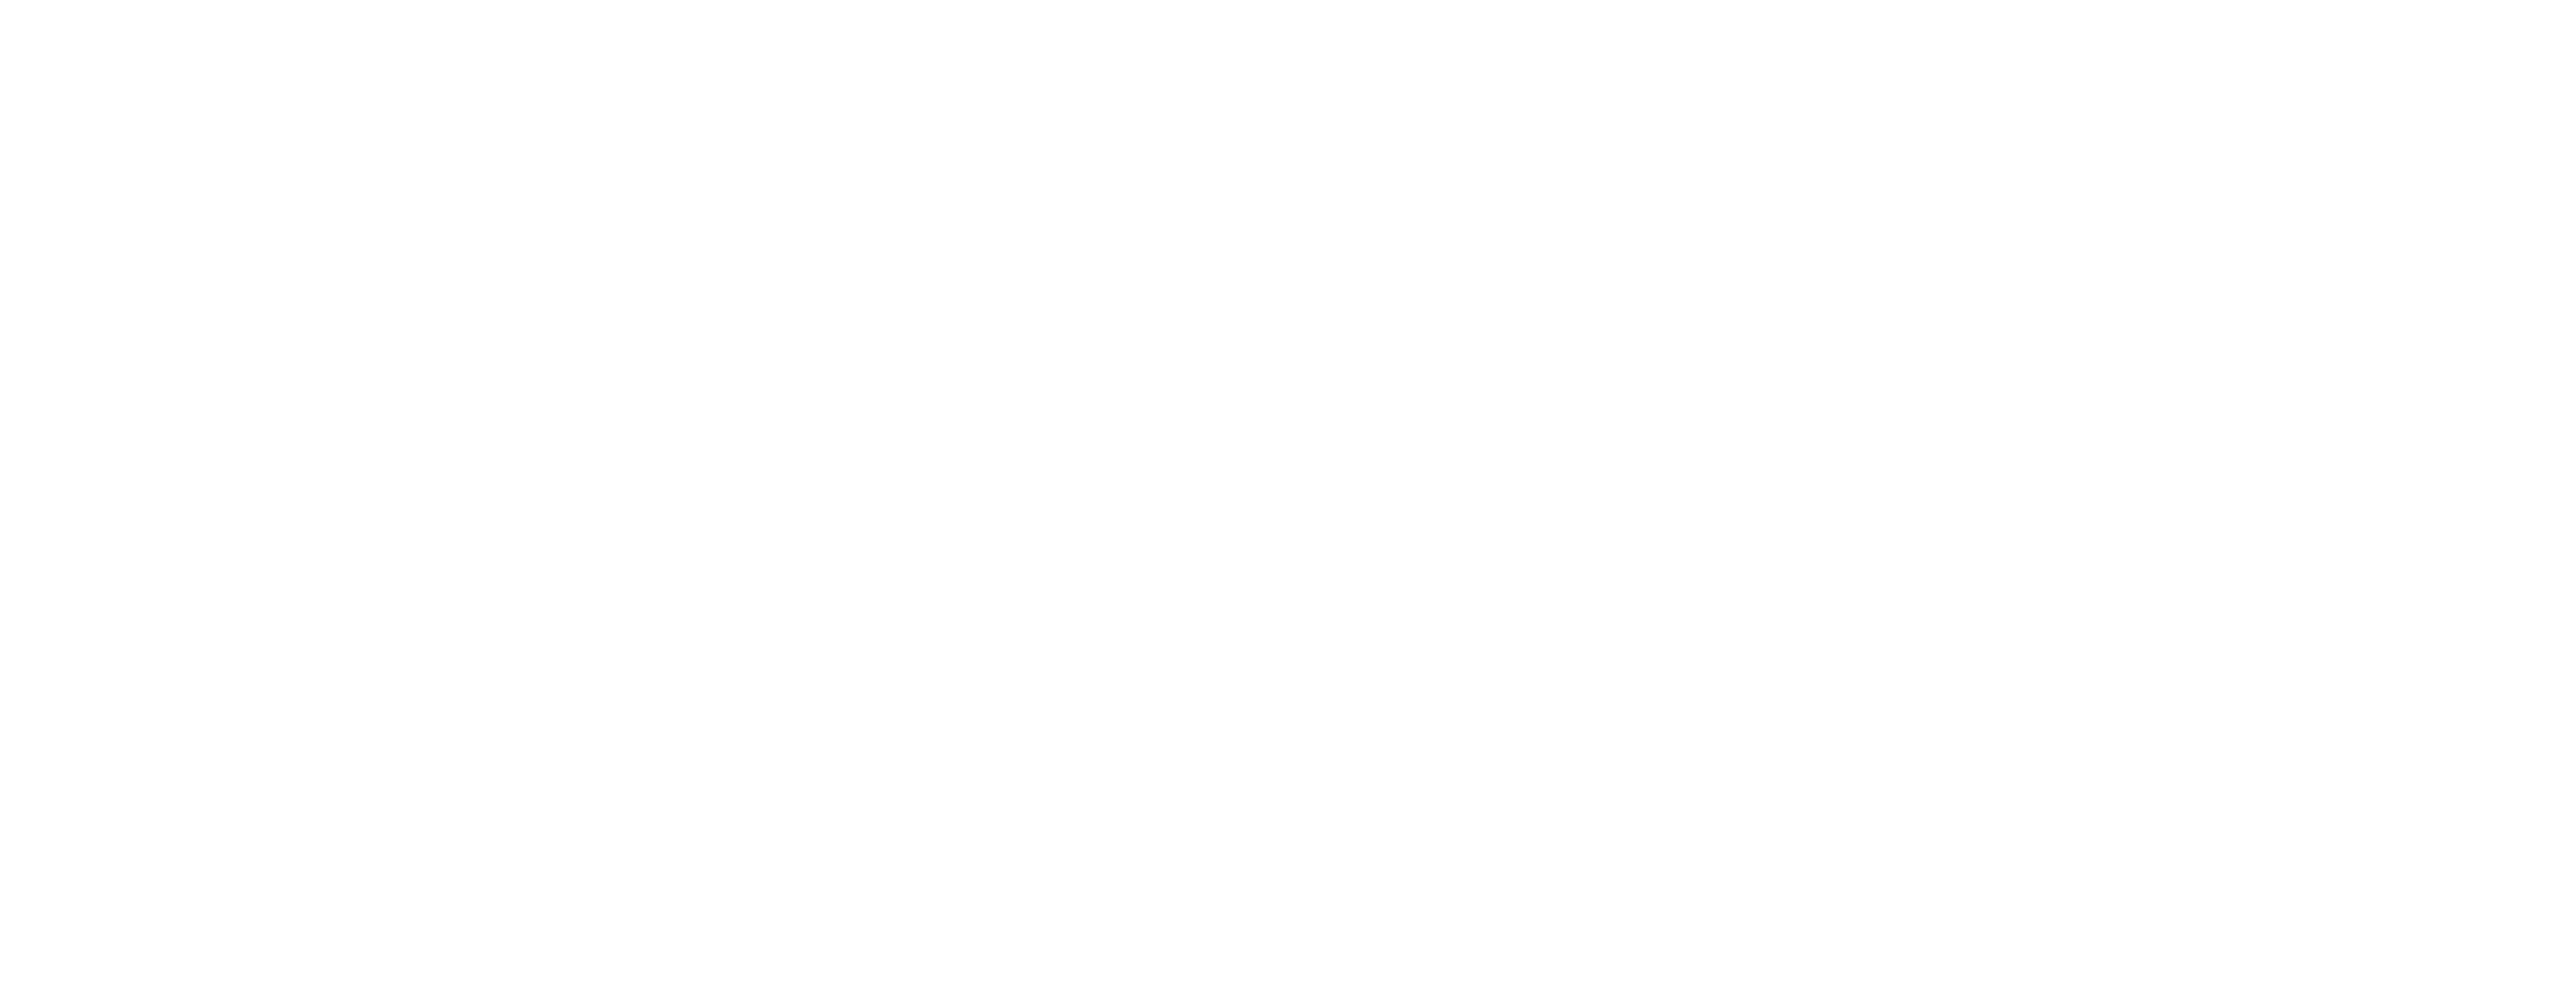 Explore The Humps and Mulkas Cave